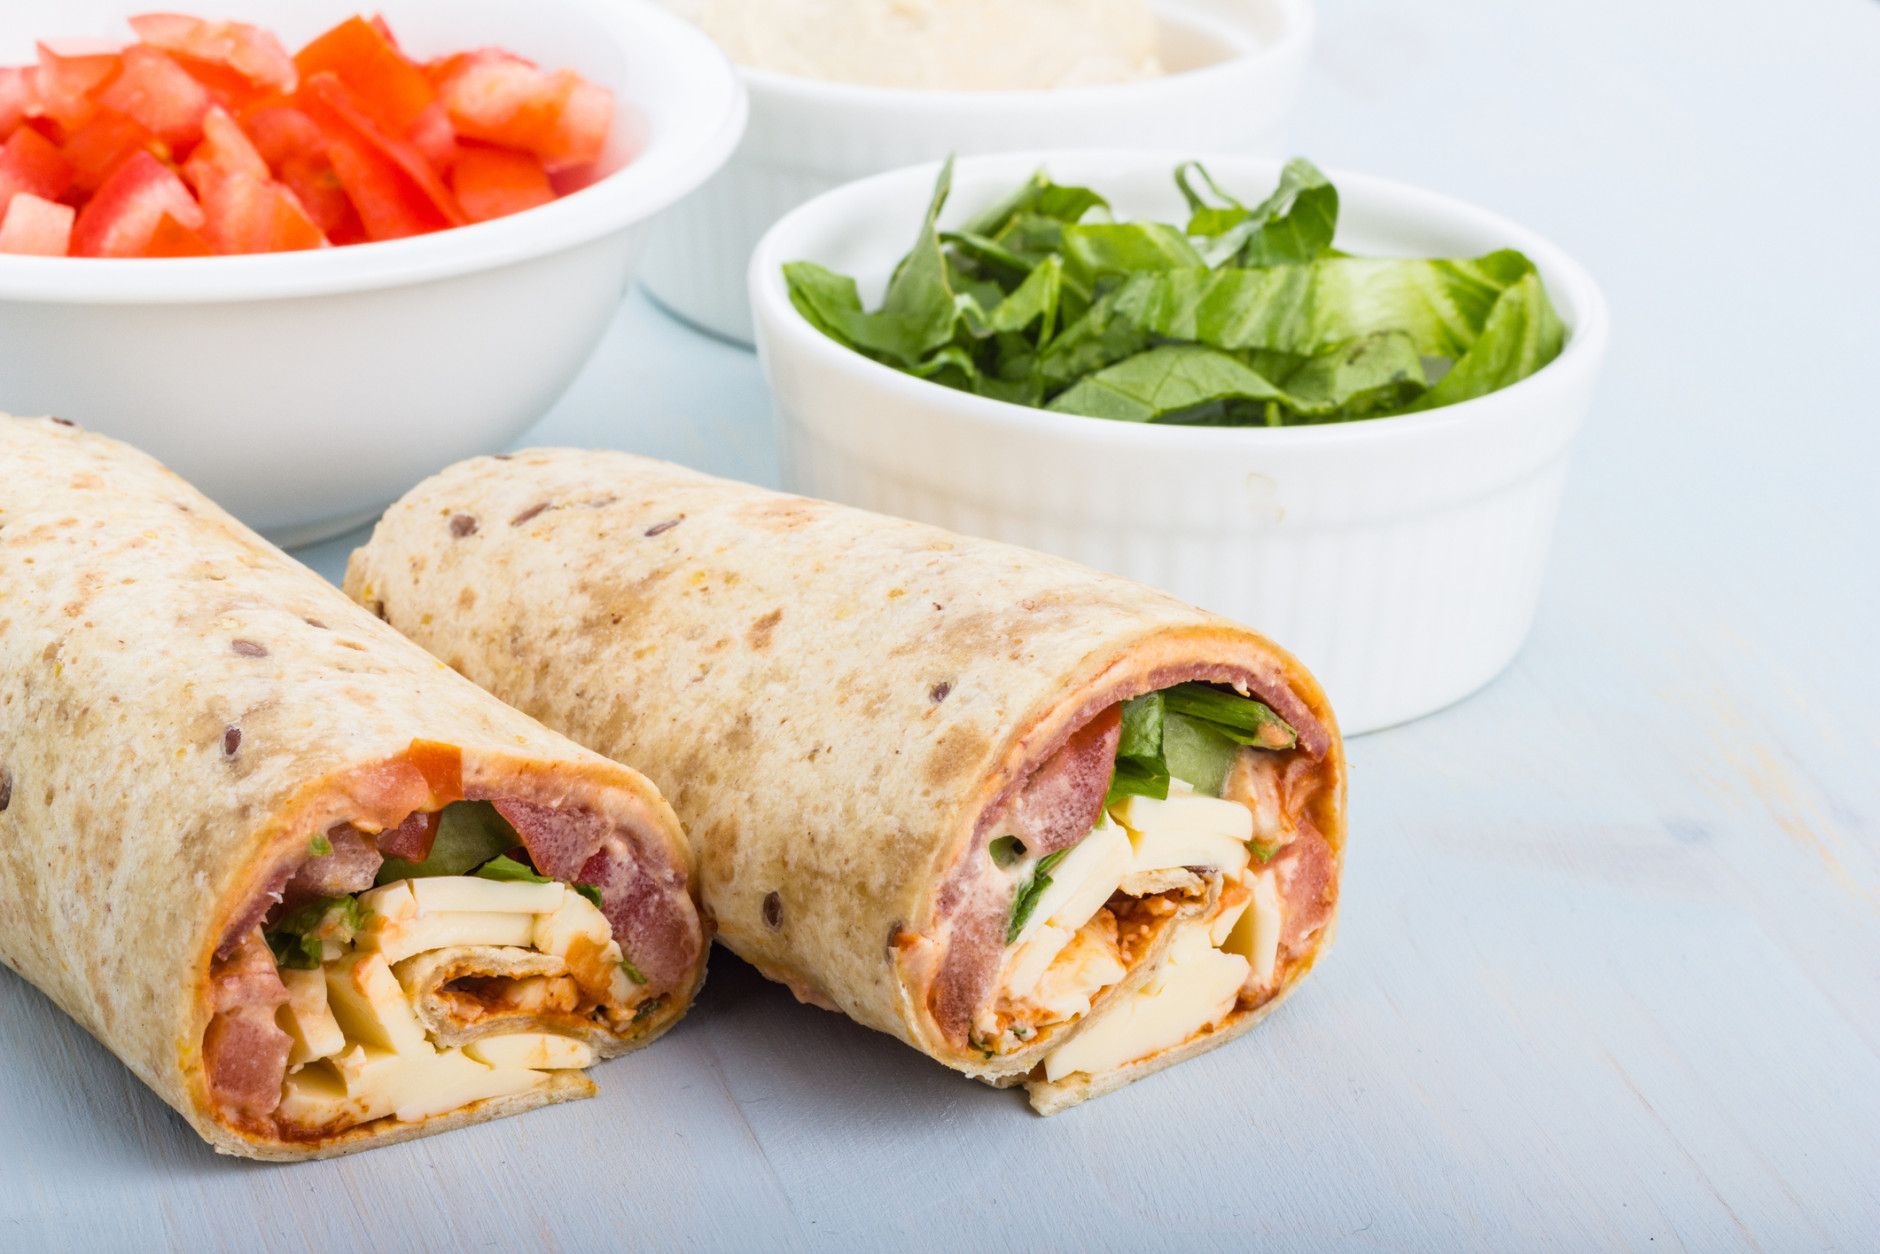 Pepperoni, tomato, lettuce, harissa and hoummous gently wraped in tortilla.